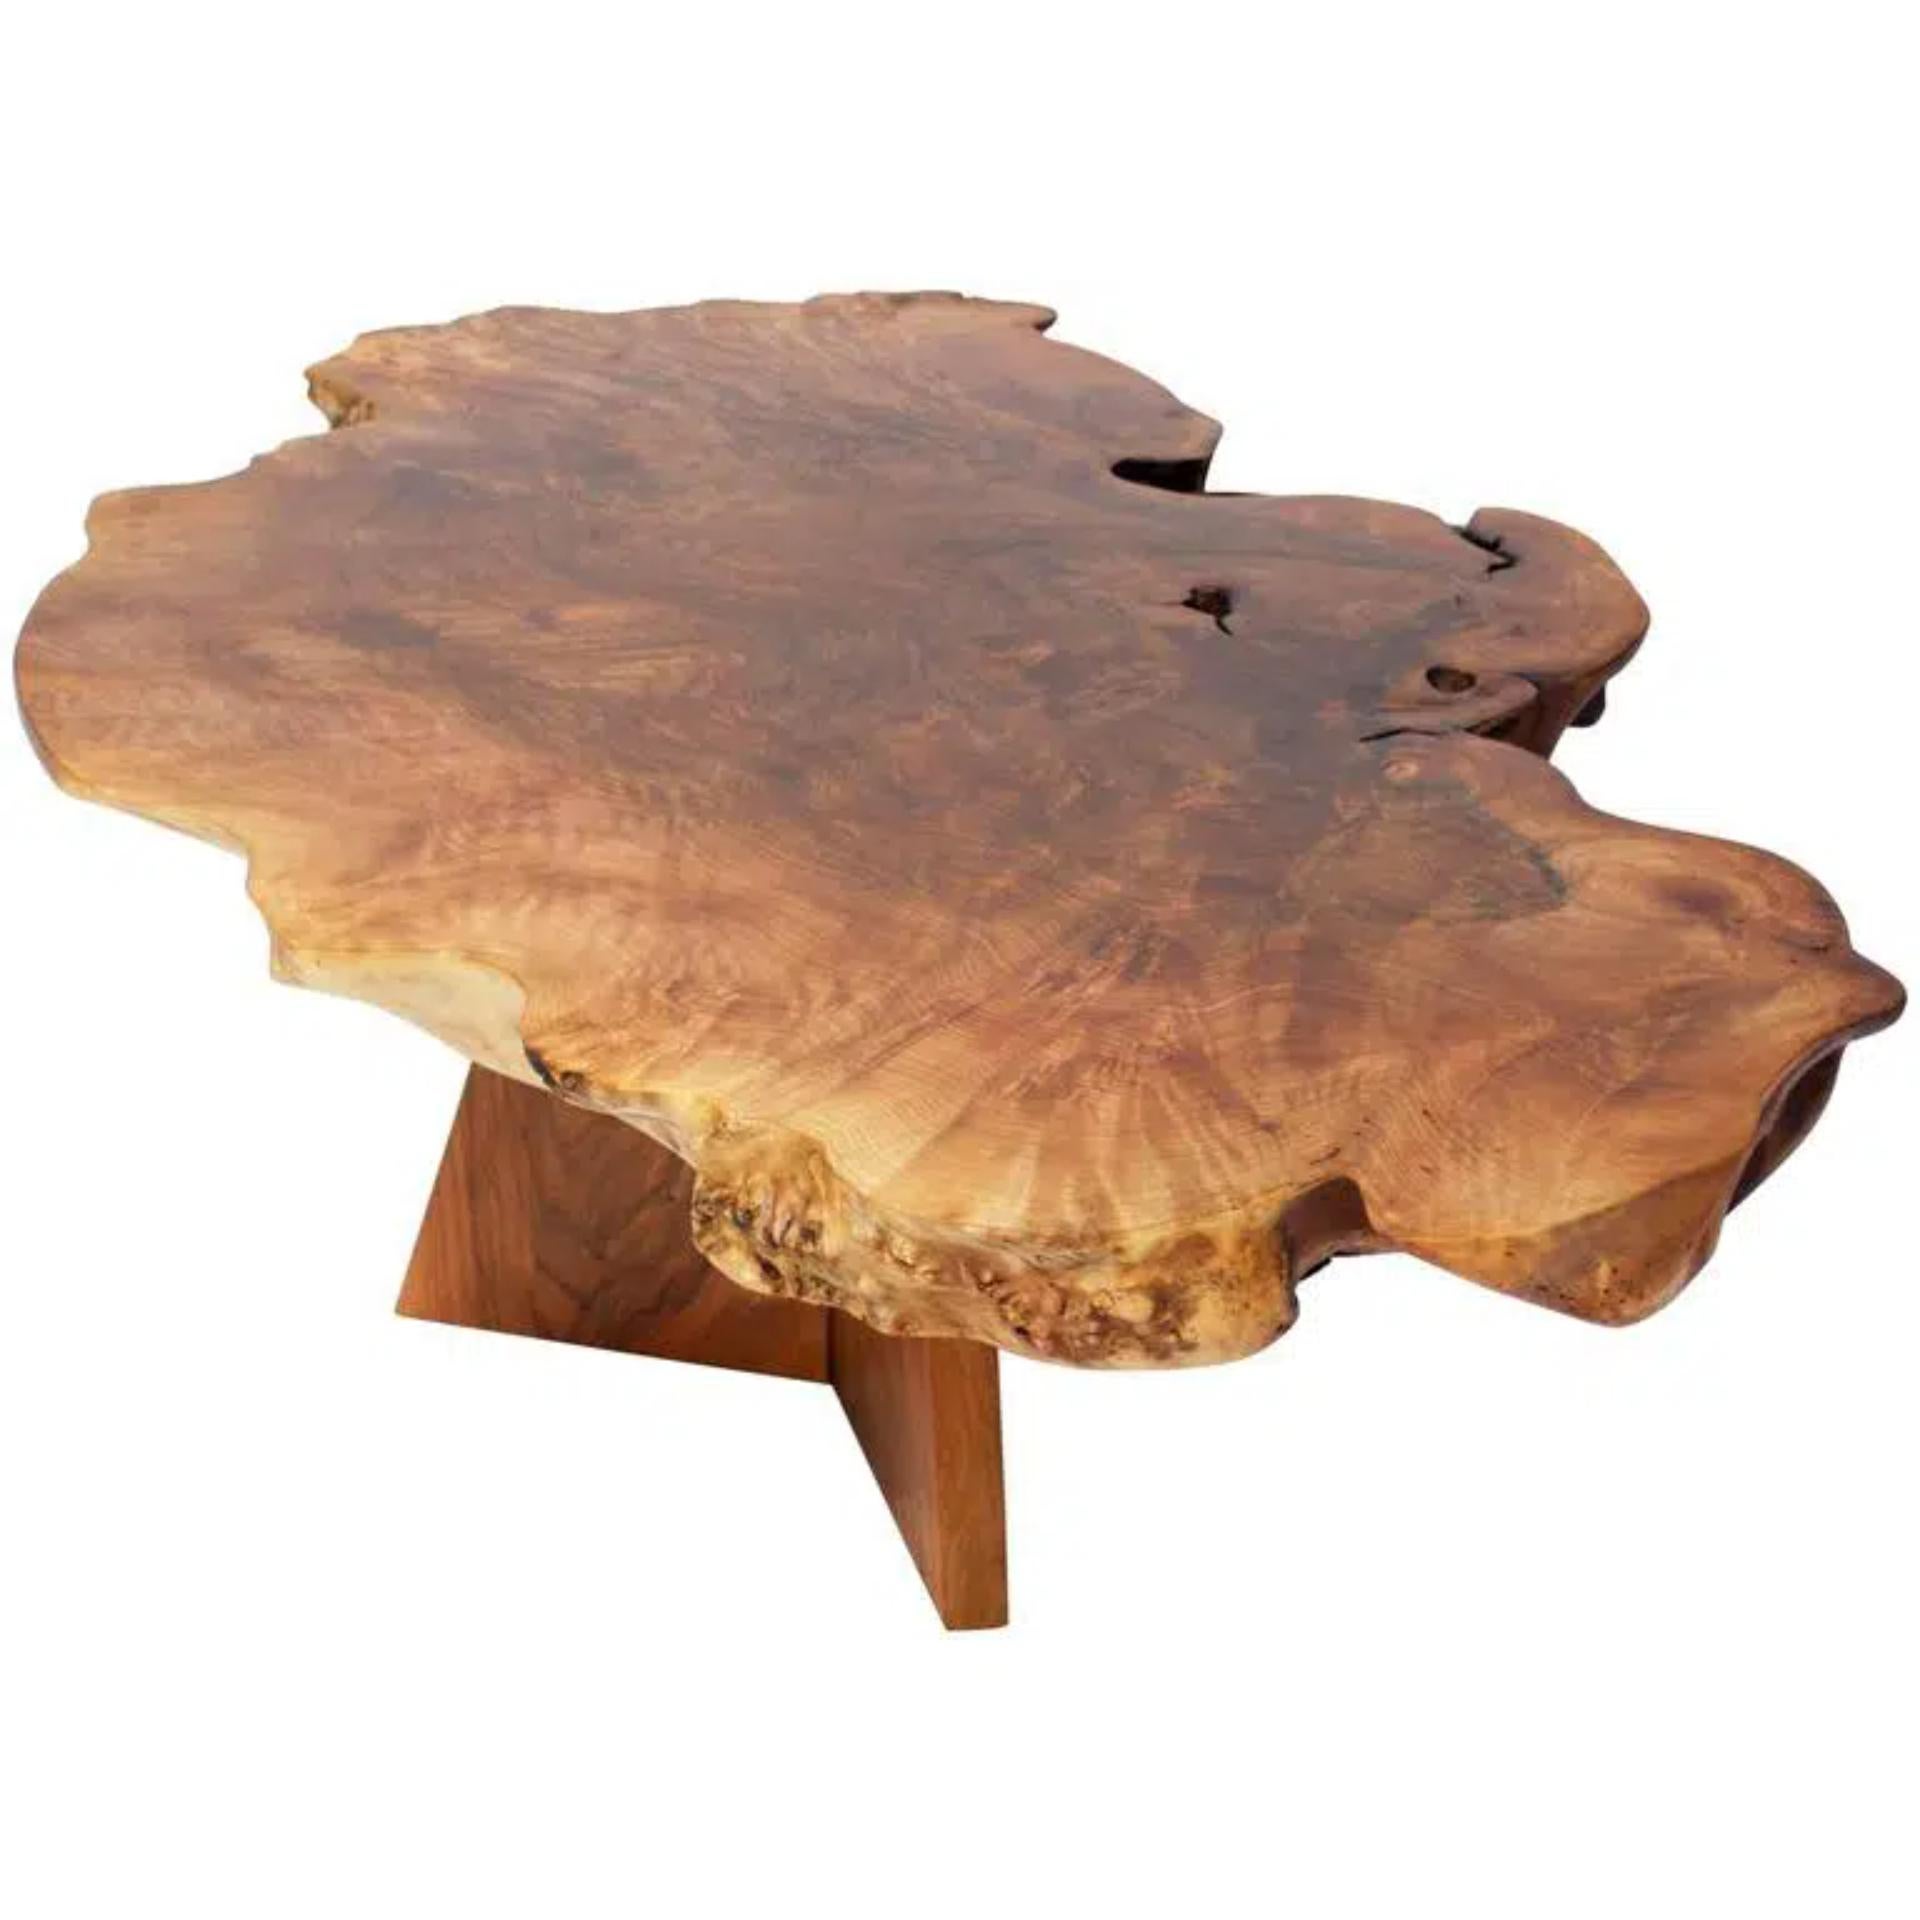 Unique signed table by Jörg Pietschmann
Table Caucasian walnut burl, American black walnut
measures: H 38 x W 121 x D 78 cm, tabletop 7 cm
Radiant grained wood with natural edge on a tripod stand of European walnut.
Polished oil finish.

In